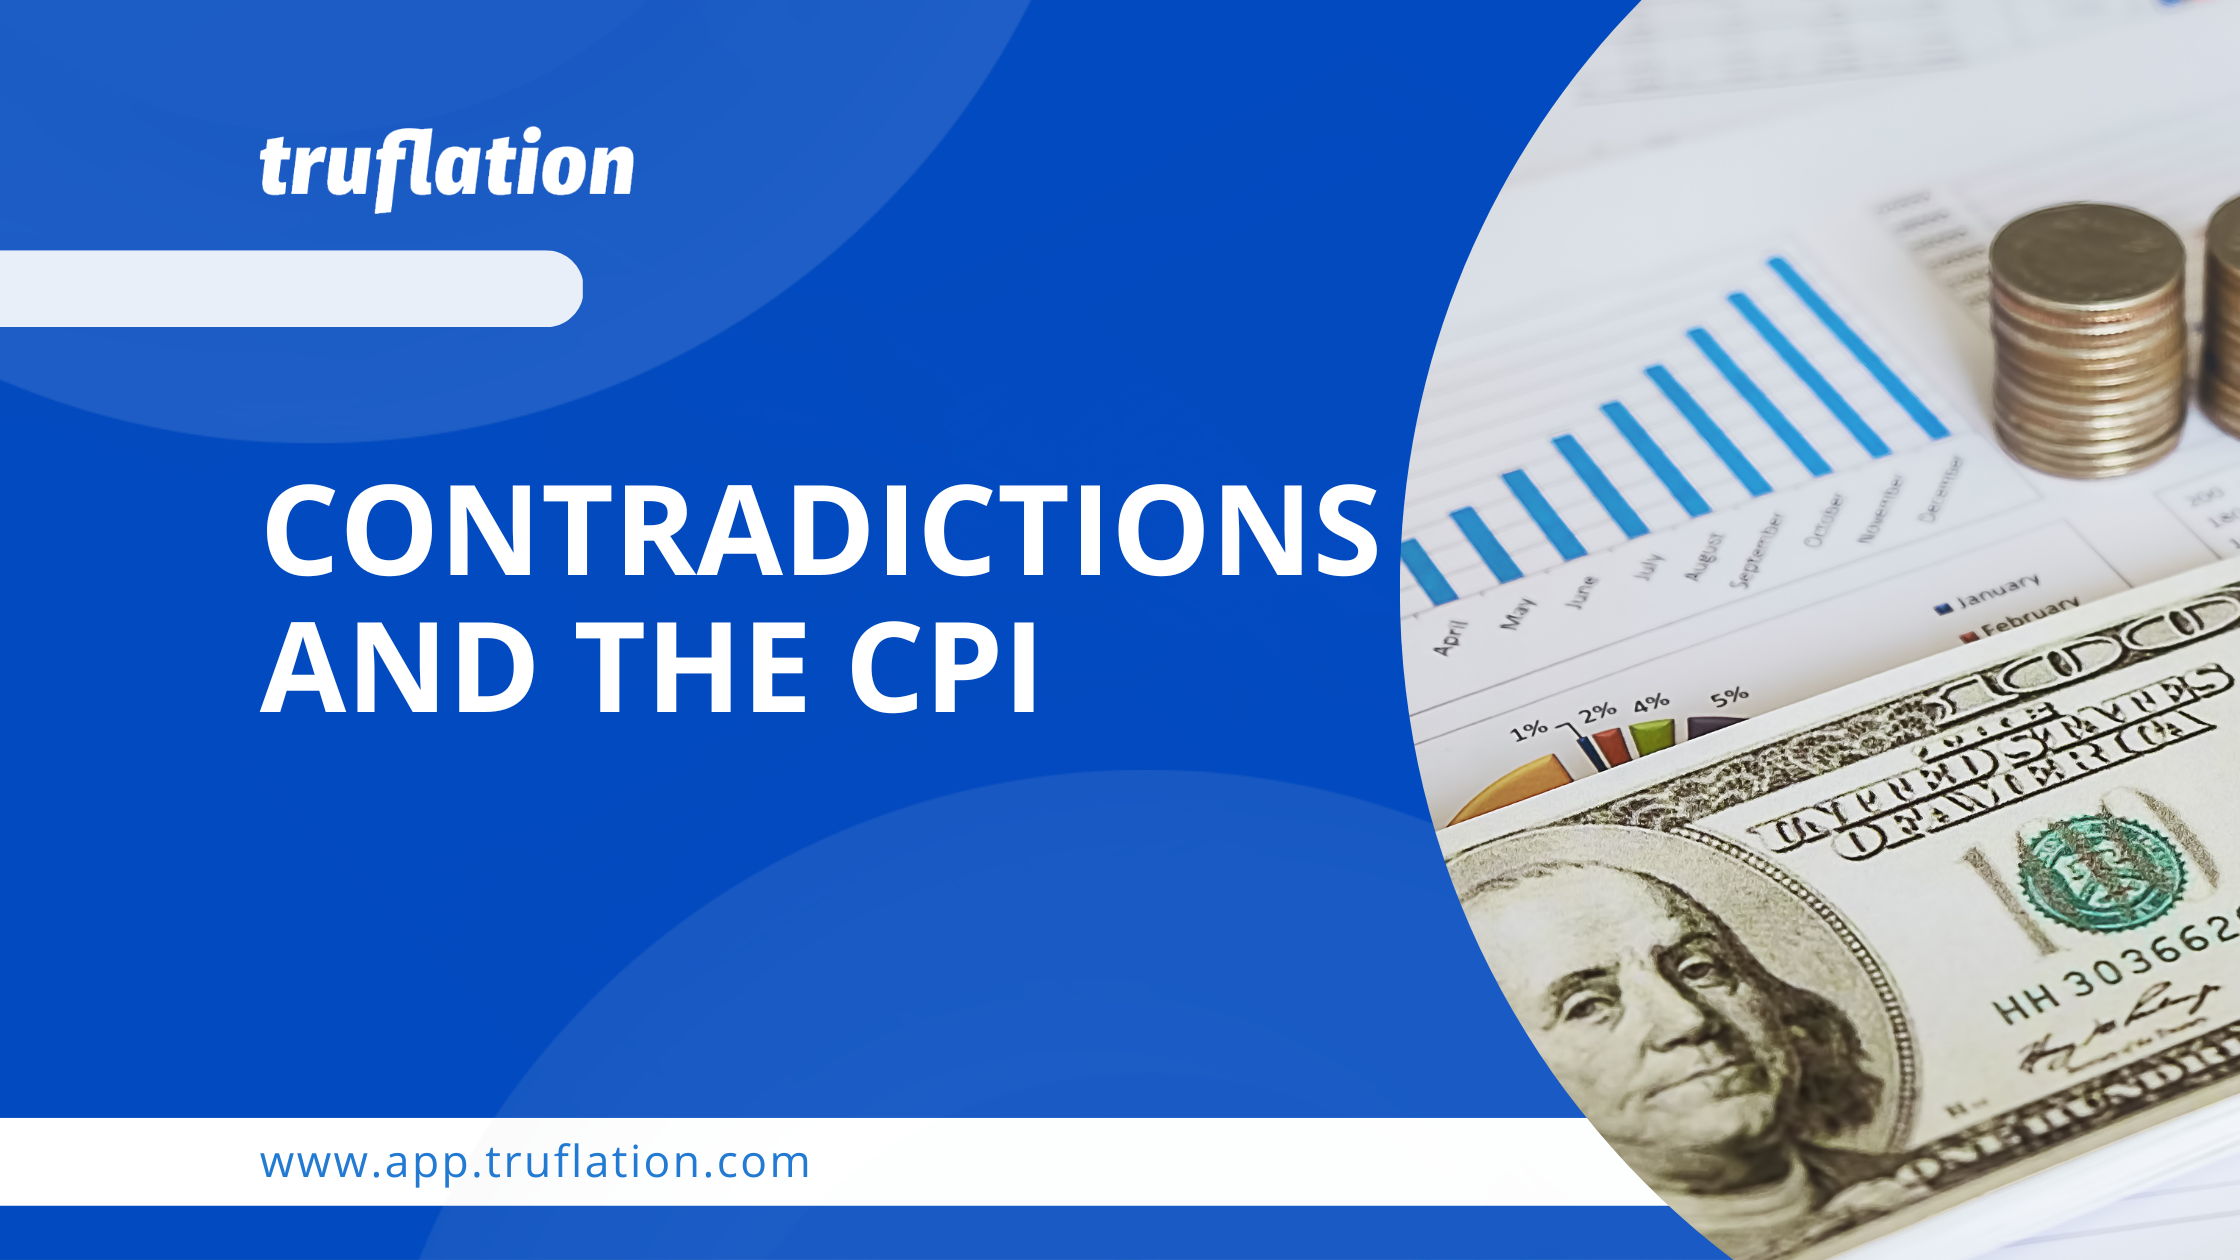 Truflation: Contradictions of the CPI